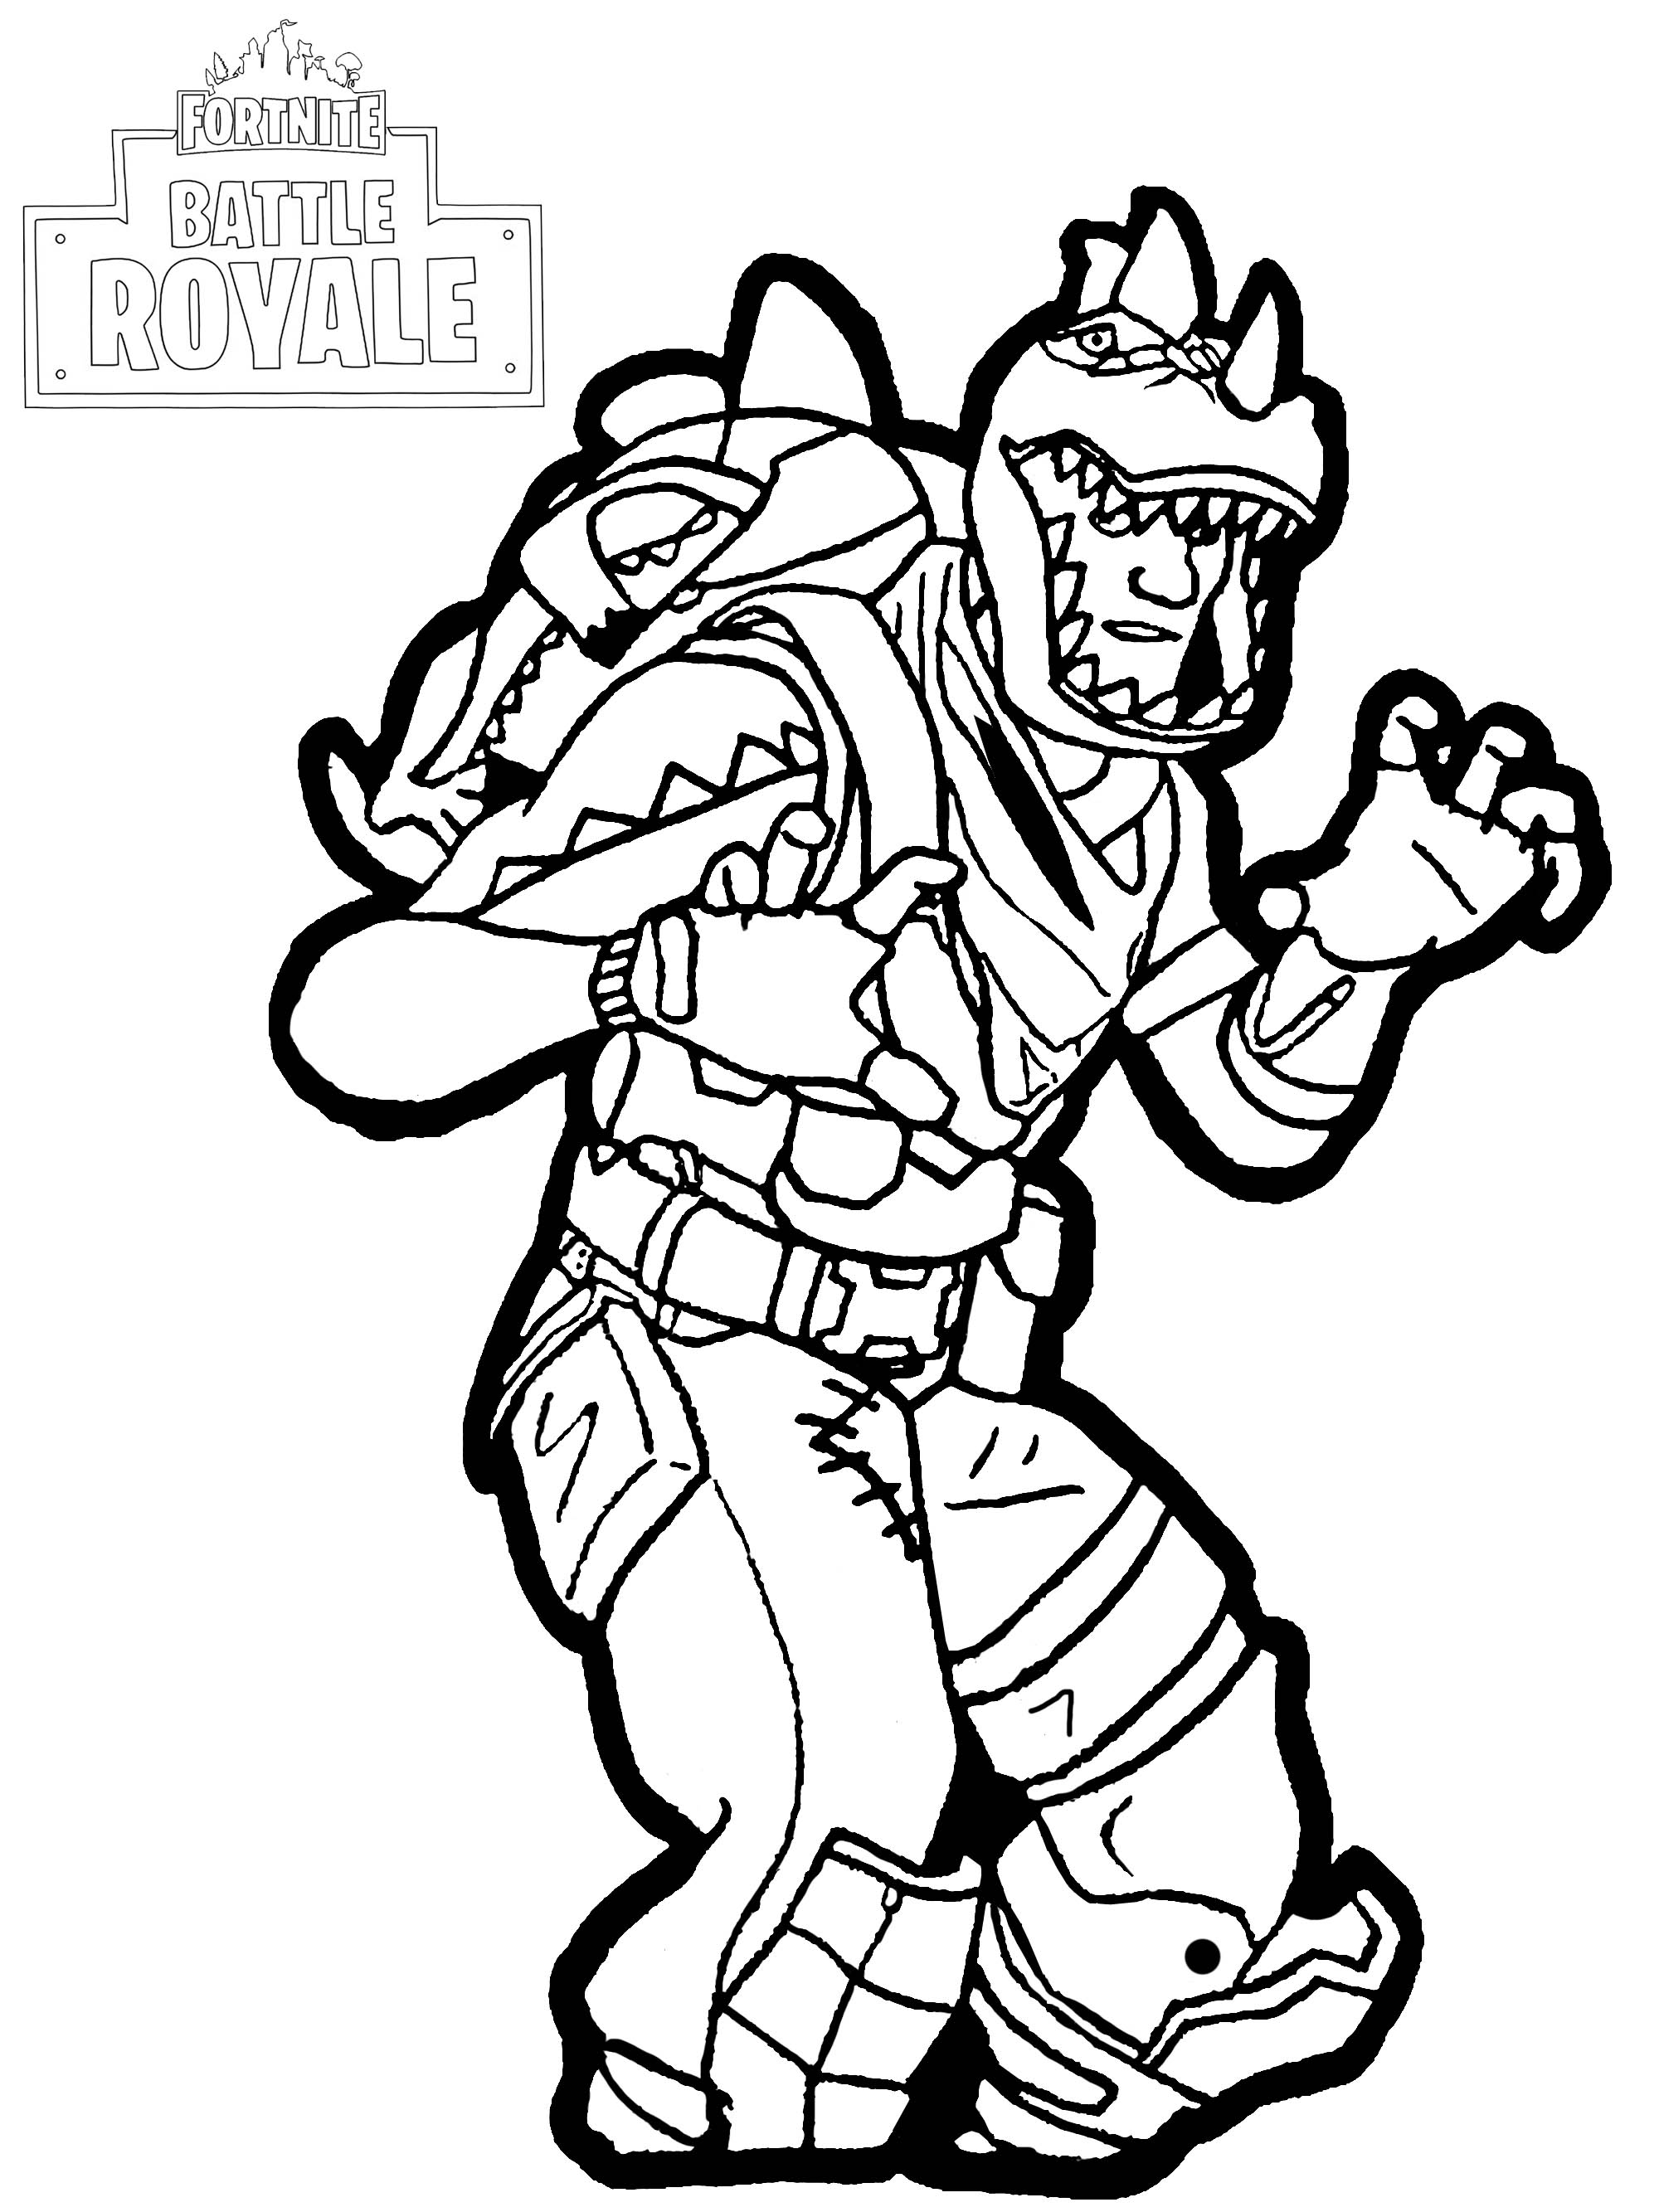 7+ Fortnite Coloring Page - ColoringPages234